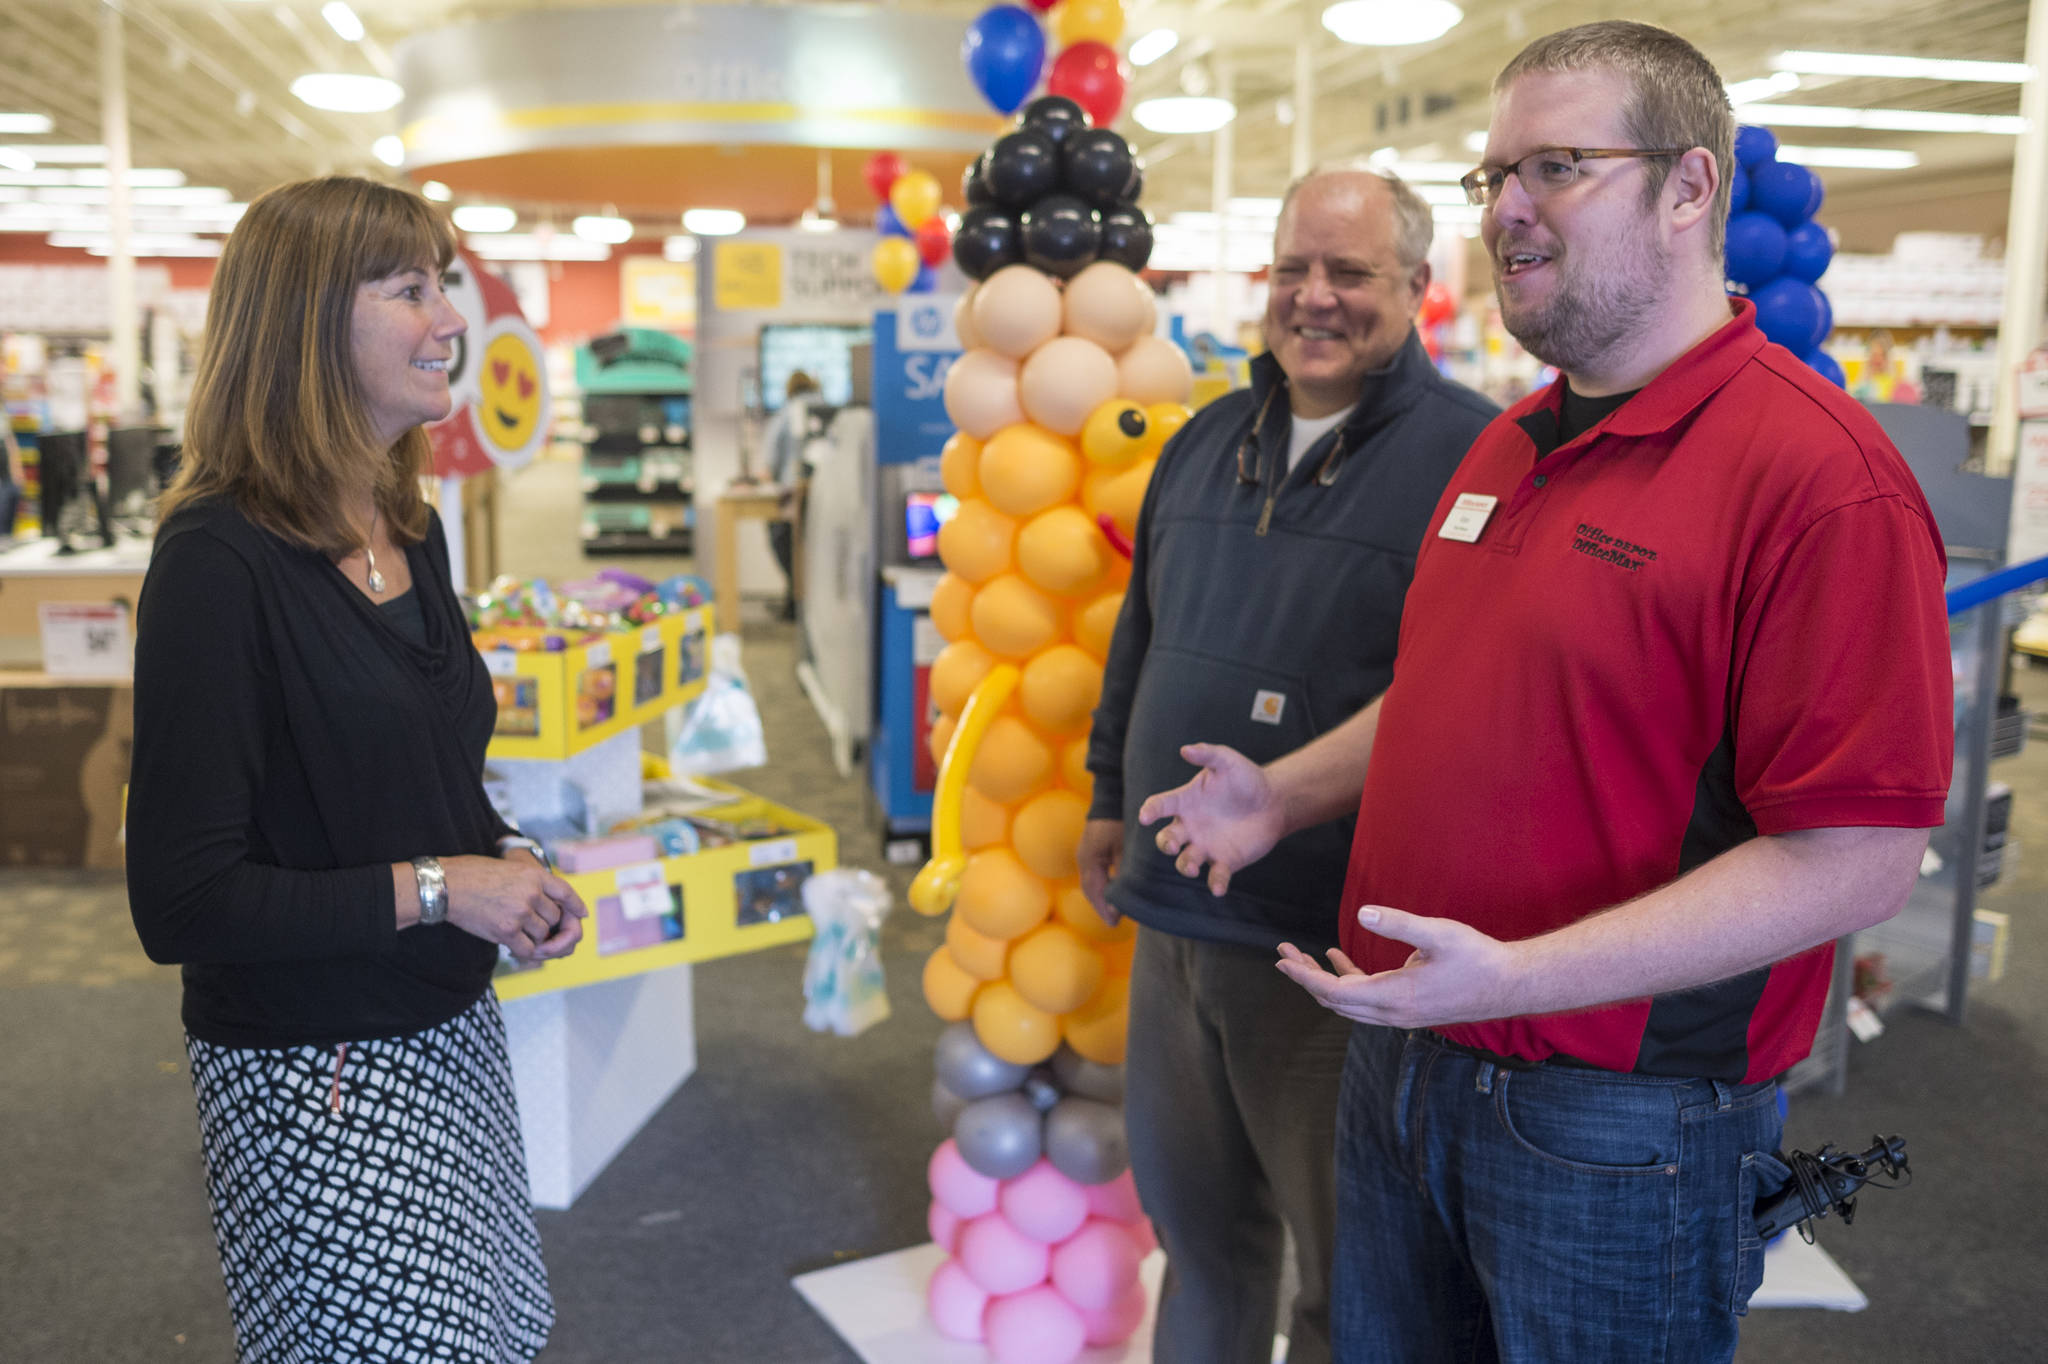 Dr. Bridget Weiss, Interim Juneau School District Superintendent, left, and Harborview Elementary School special education teacher Steve Byers, center, speak with Office Max store manager Adam Dordea on Thursday, August 16, 2018, during a store fundraising event for elemenary schools. Office Max pledged to donate up to $10,000. (Michael Penn | Juneau Empire)